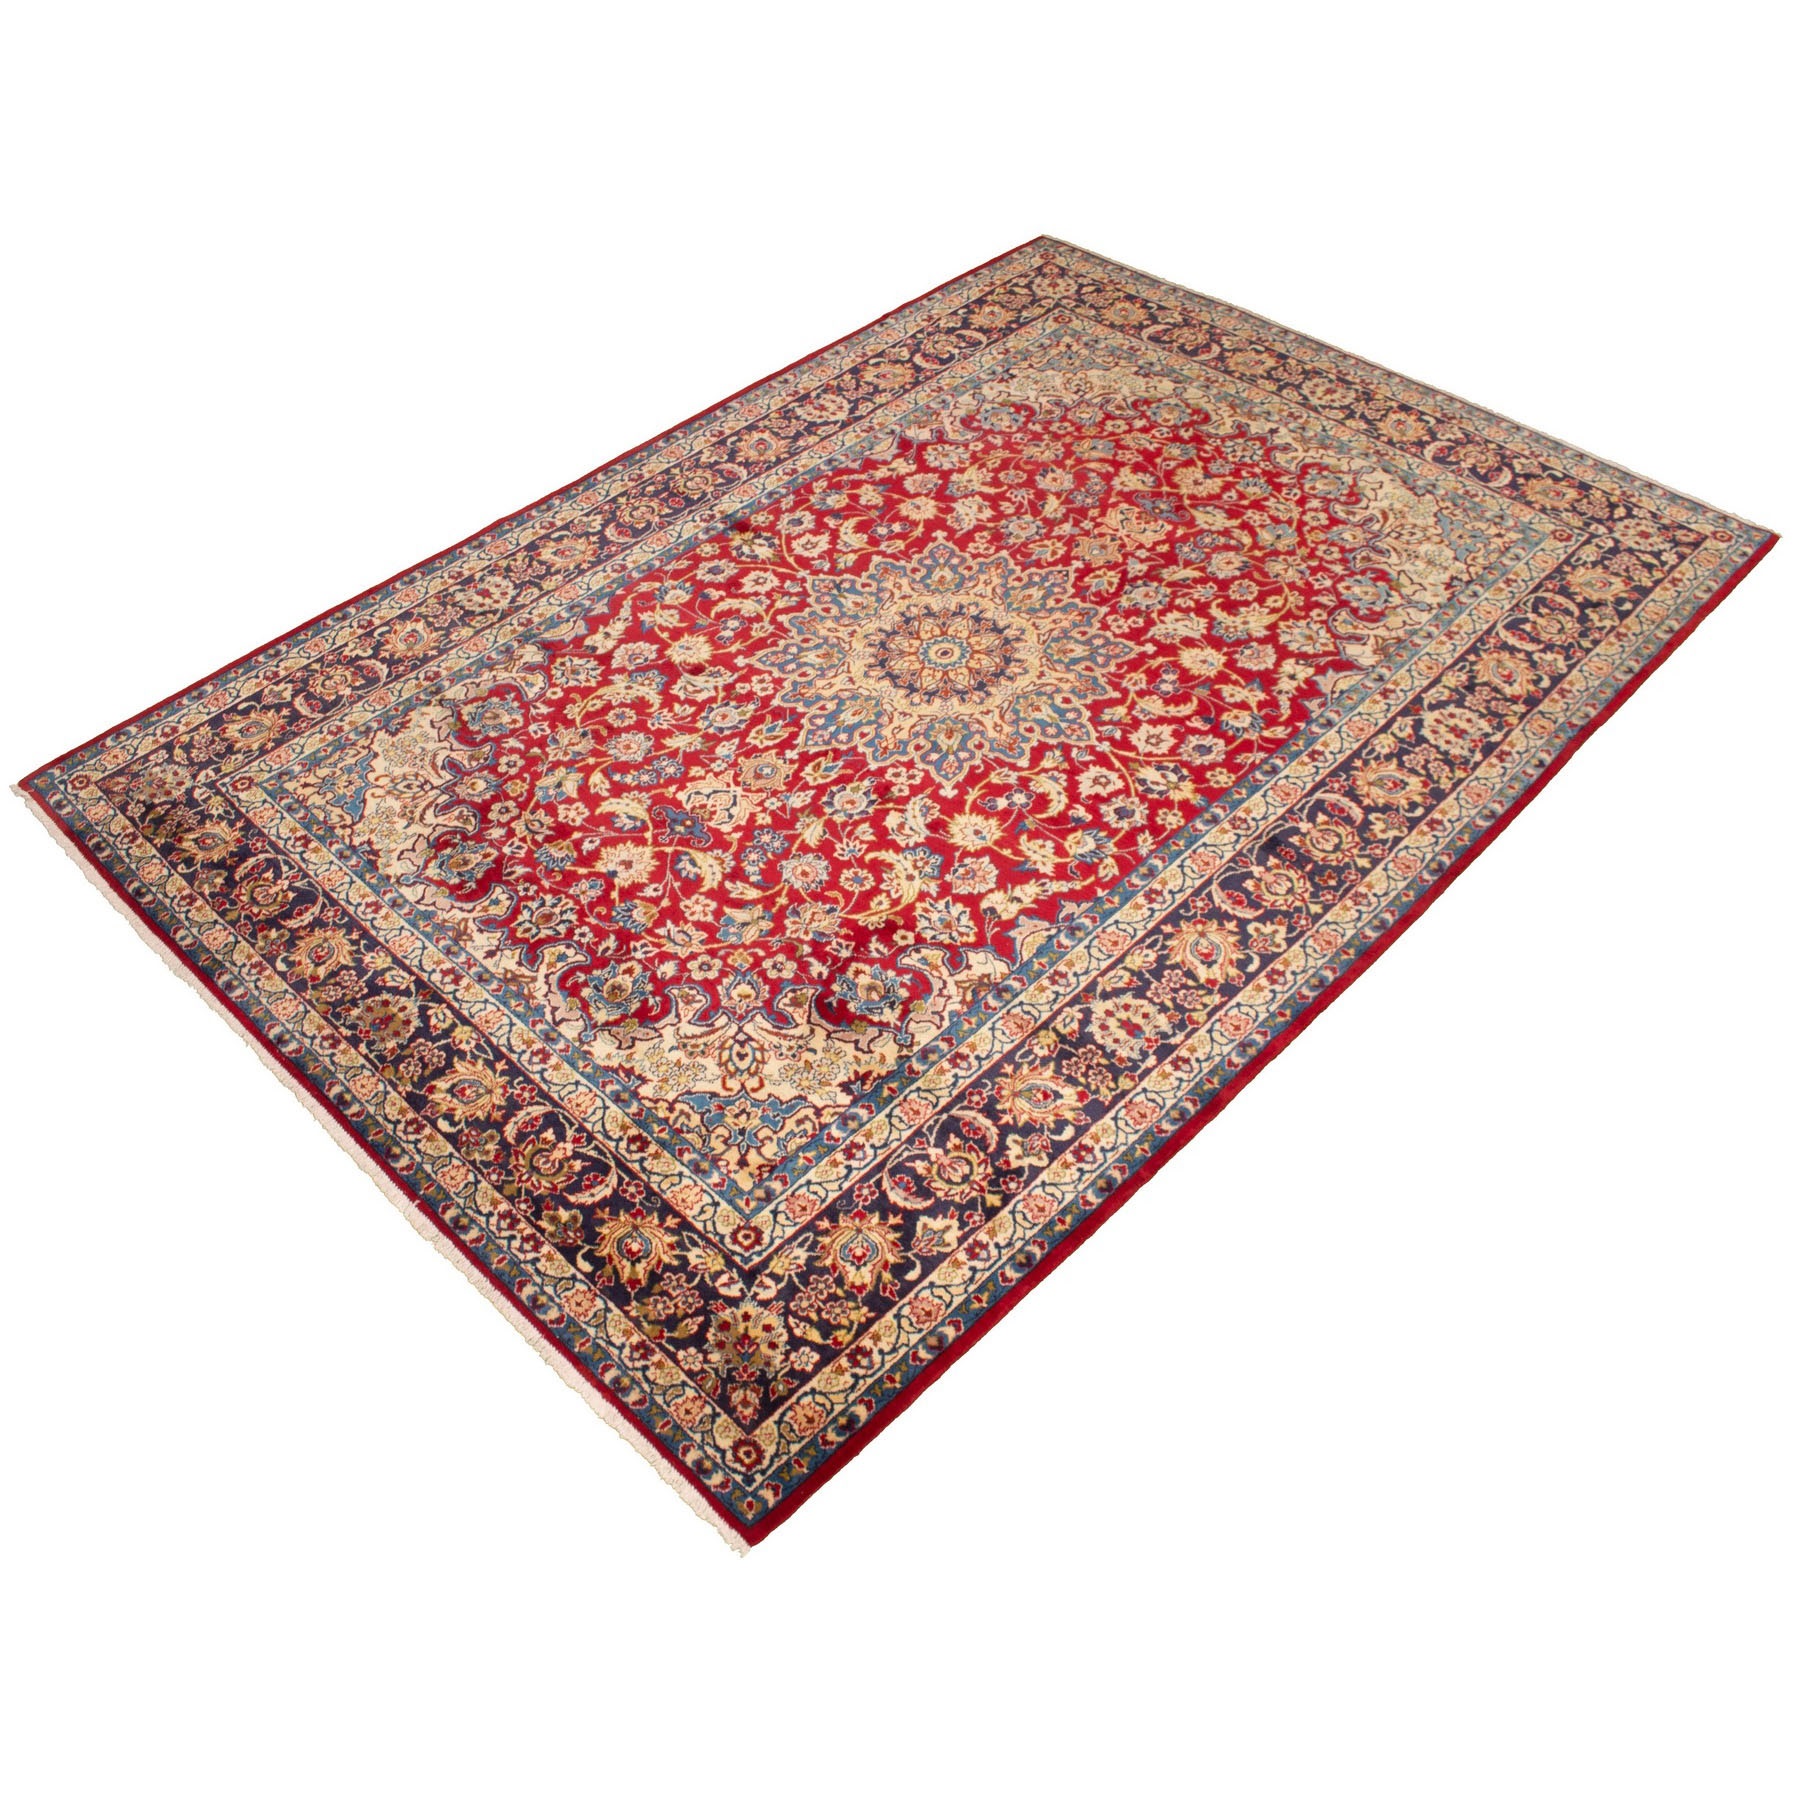 9-10 x14-1  Red Semi Antique Persian Isfahan Pure wool Hand Knotted Oriental Rug r47881